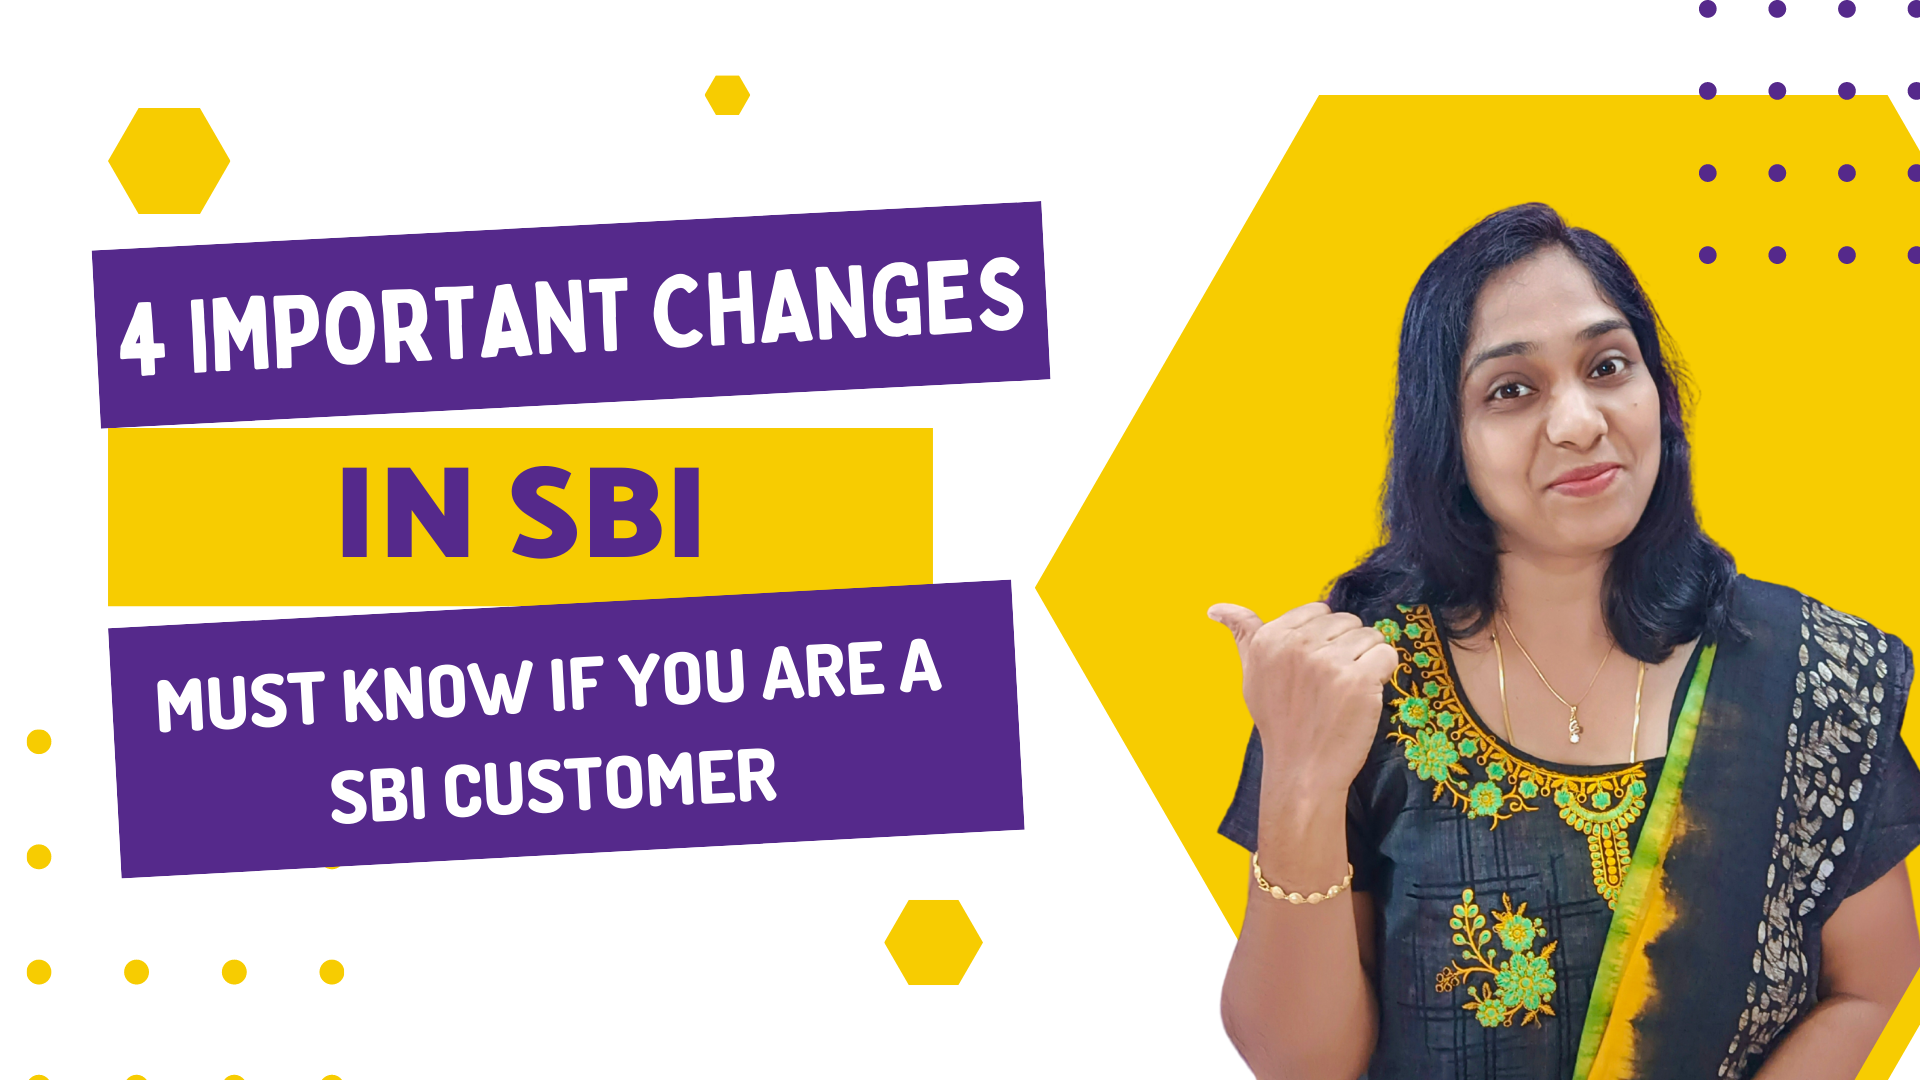 4 Important Changes In SBI - Must Know If You Are A SBI Customer | Banking News | YONO, NetBanking